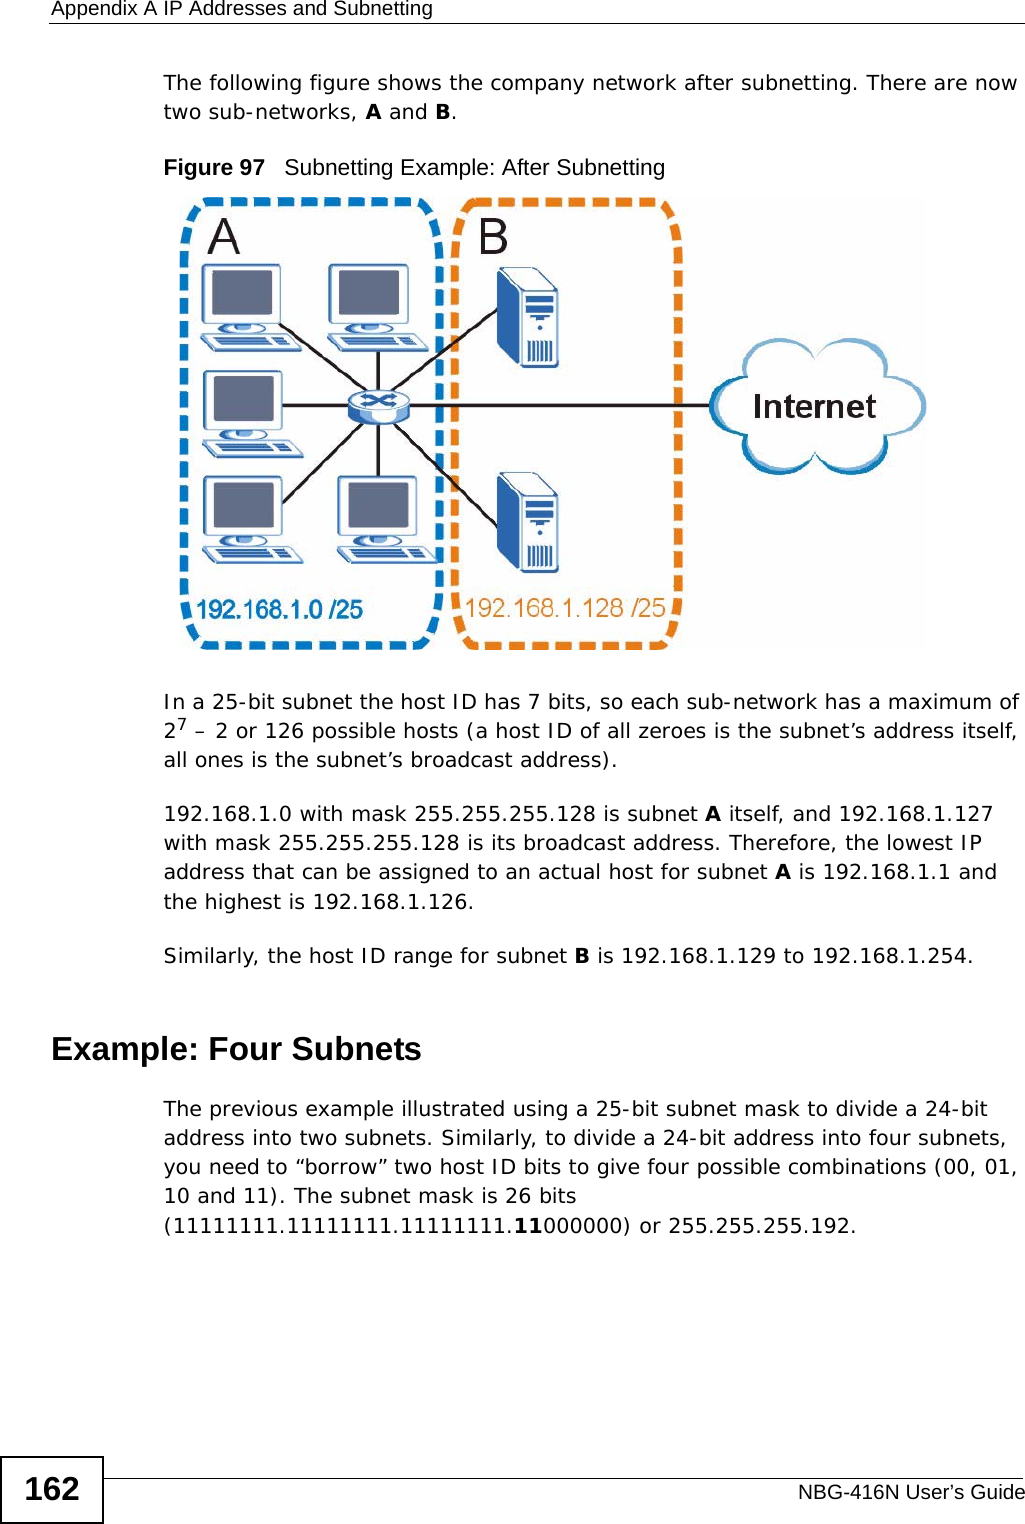 Appendix A IP Addresses and SubnettingNBG-416N User’s Guide162The following figure shows the company network after subnetting. There are now two sub-networks, A and B. Figure 97   Subnetting Example: After SubnettingIn a 25-bit subnet the host ID has 7 bits, so each sub-network has a maximum of 27 – 2 or 126 possible hosts (a host ID of all zeroes is the subnet’s address itself, all ones is the subnet’s broadcast address).192.168.1.0 with mask 255.255.255.128 is subnet A itself, and 192.168.1.127 with mask 255.255.255.128 is its broadcast address. Therefore, the lowest IP address that can be assigned to an actual host for subnet A is 192.168.1.1 and the highest is 192.168.1.126. Similarly, the host ID range for subnet B is 192.168.1.129 to 192.168.1.254.Example: Four Subnets The previous example illustrated using a 25-bit subnet mask to divide a 24-bit address into two subnets. Similarly, to divide a 24-bit address into four subnets, you need to “borrow” two host ID bits to give four possible combinations (00, 01, 10 and 11). The subnet mask is 26 bits (11111111.11111111.11111111.11000000) or 255.255.255.192. 